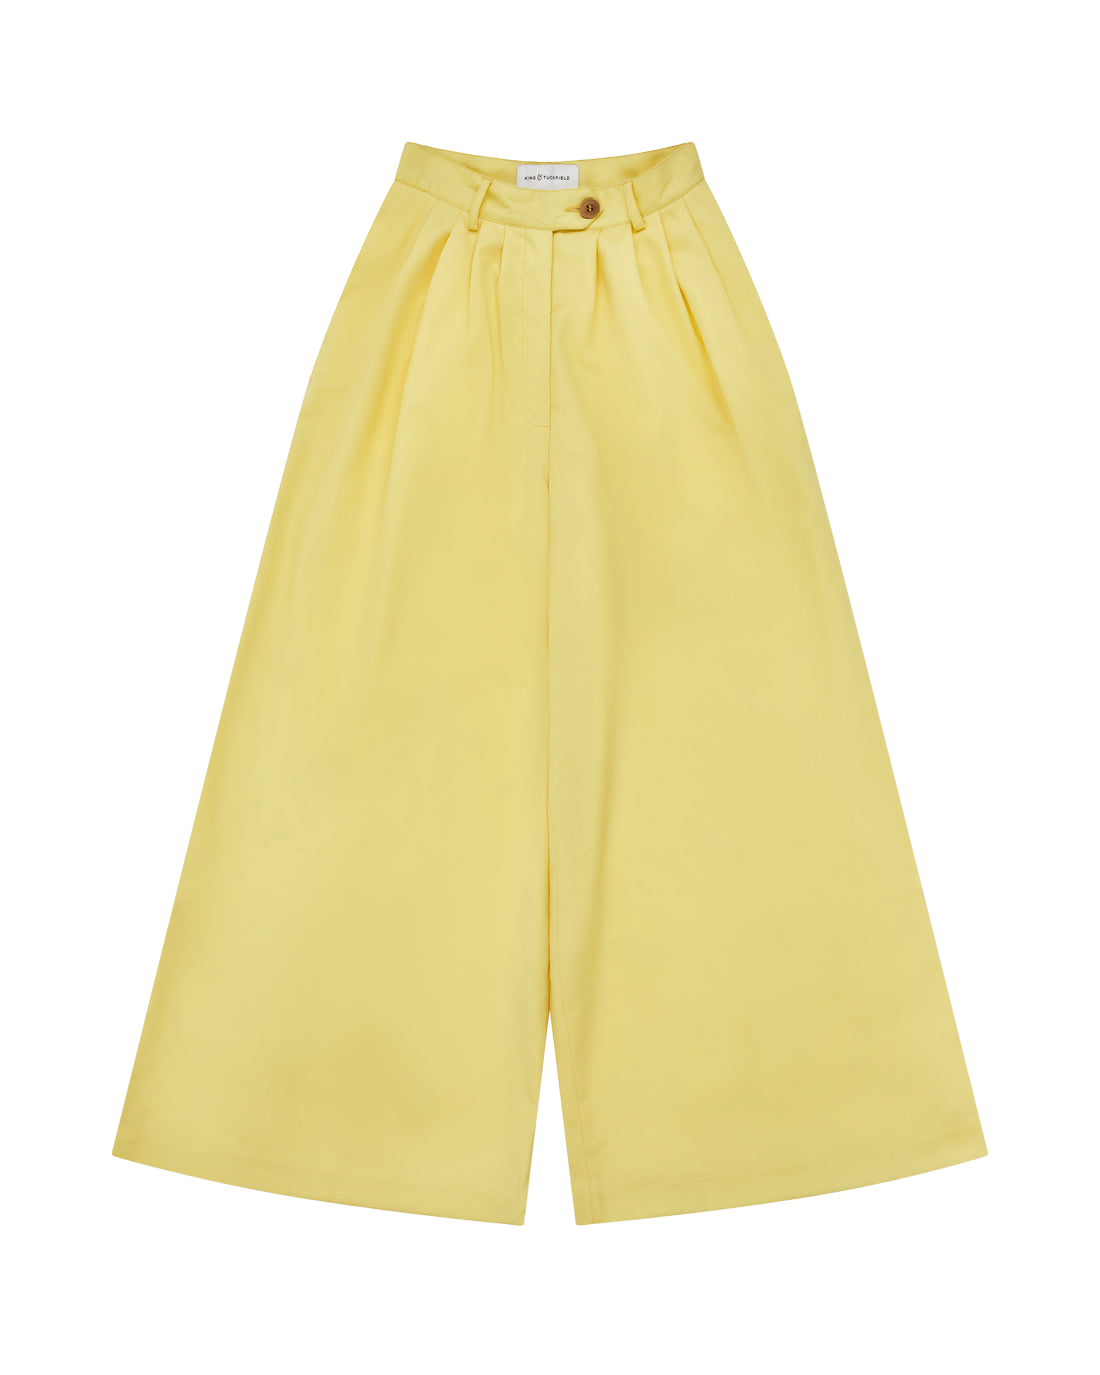 https://storage.googleapis.com/download/storage/v1/b/whering.appspot.com/o/marketplace_product_images%2Fking-tuckfield-curved-lapel-palazzo-pant-yellow-qwo2XuY9H481Y91f2vE8Rs.png?generation=1681220379912531&alt=media